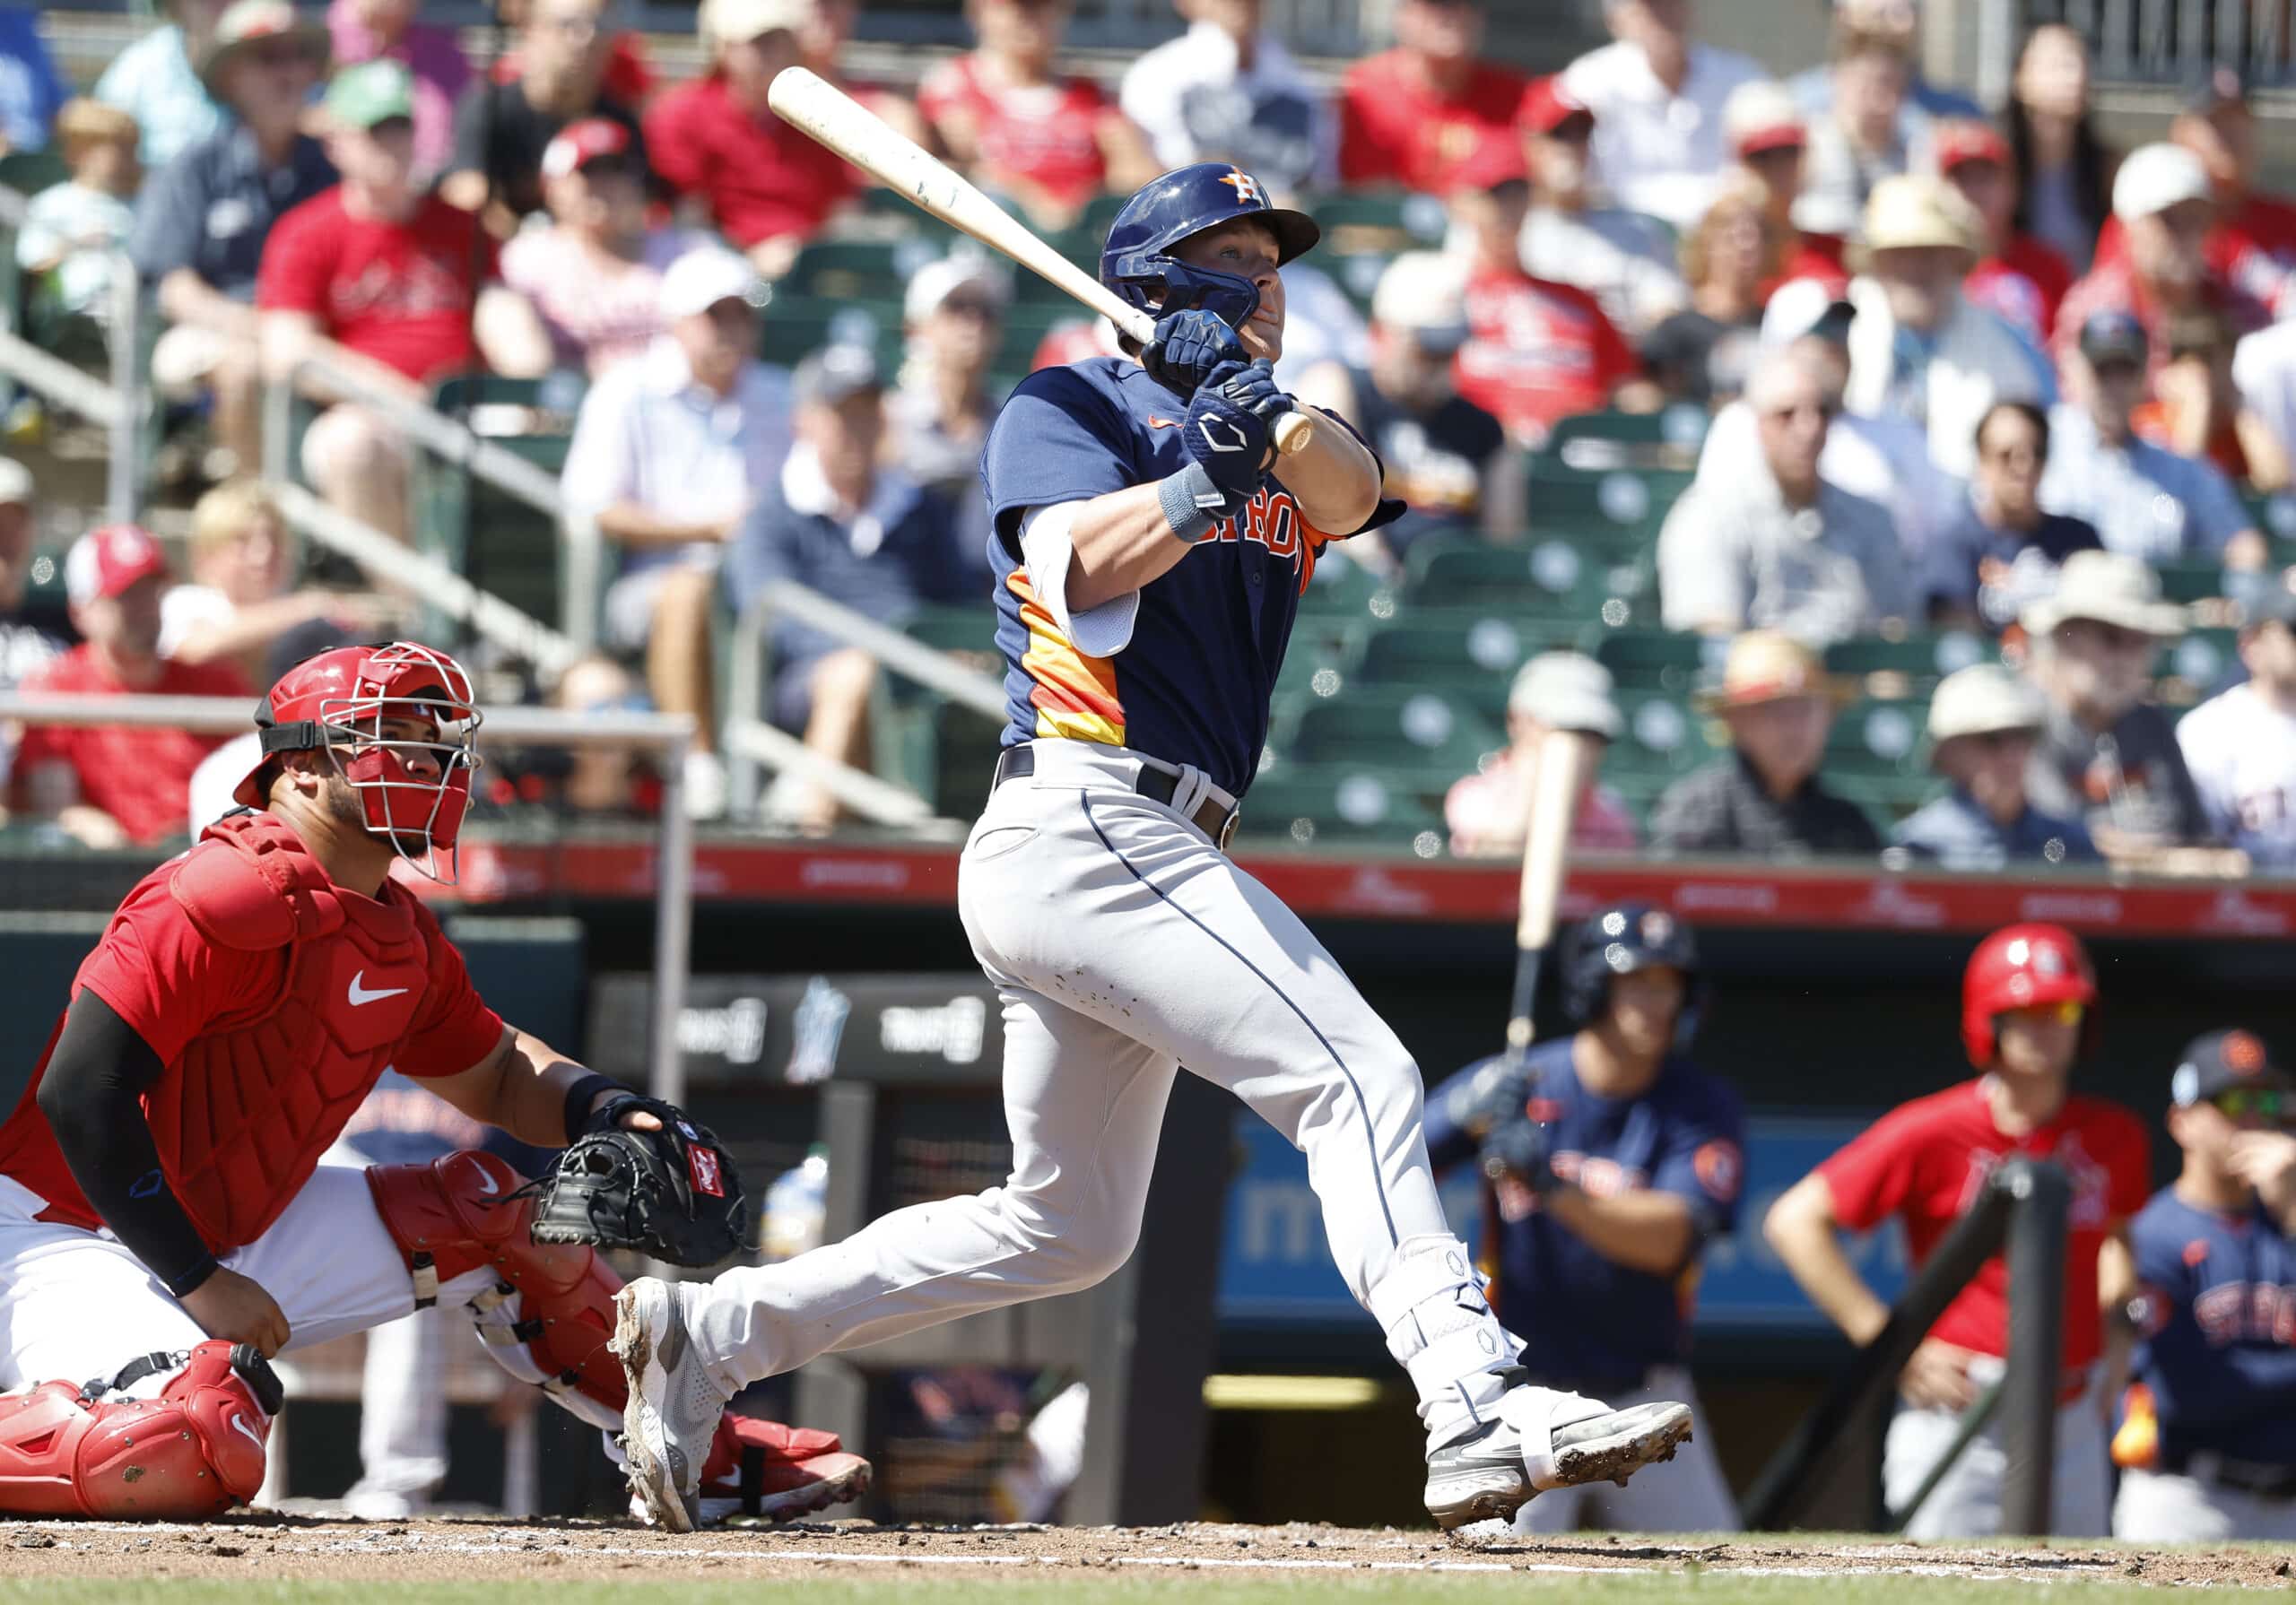 Houston Astros Reassign Trio of Prospects to Minor League Camp